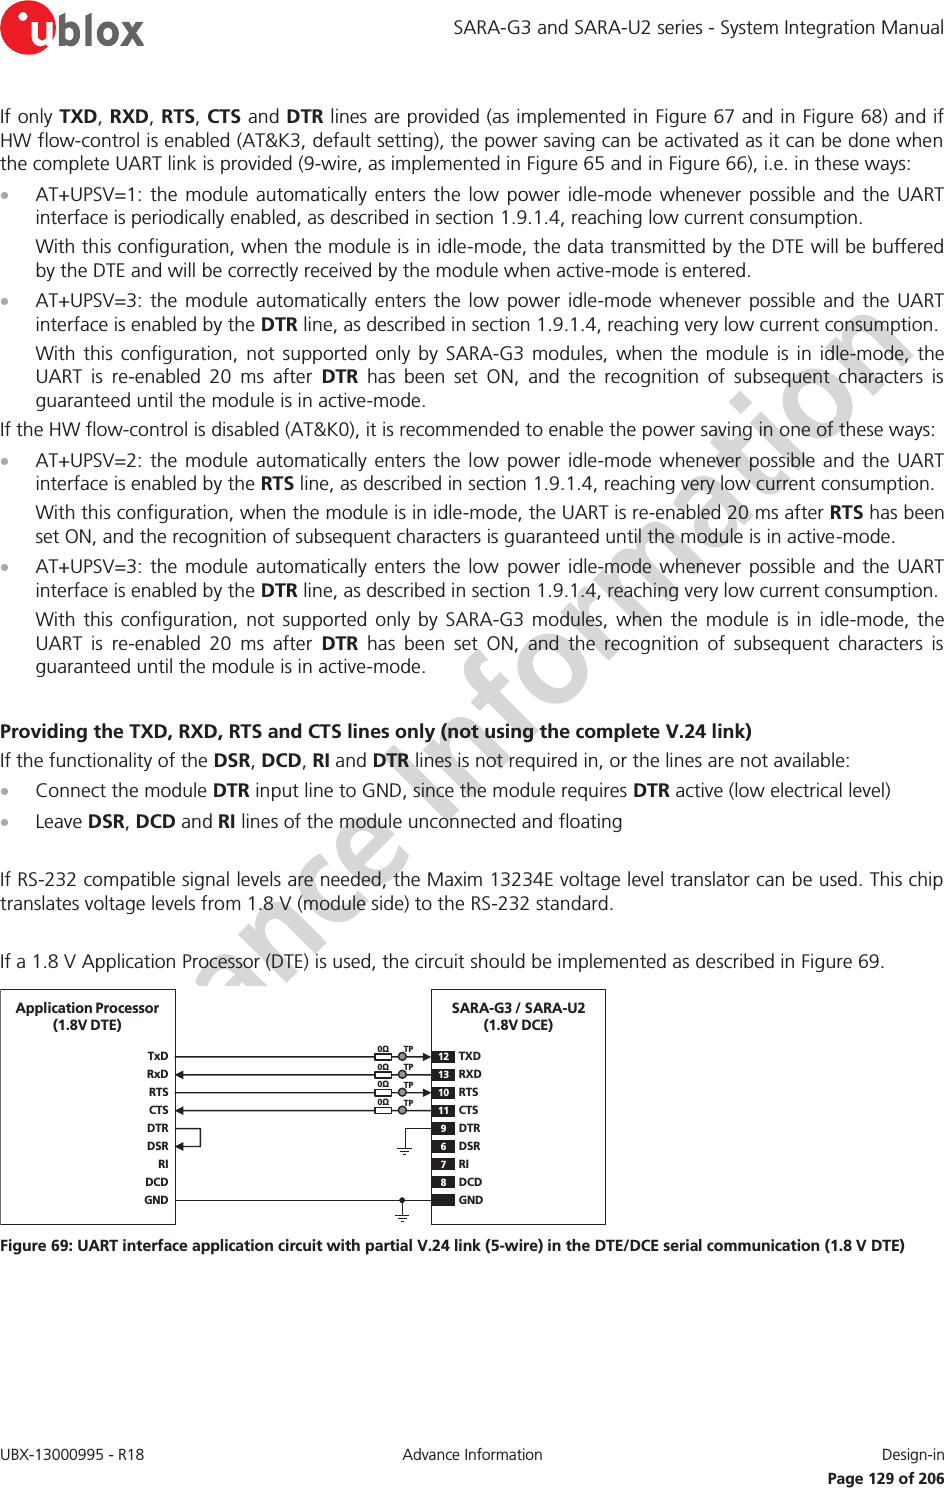 SARA-G3 and SARA-U2 series - System Integration Manual UBX-13000995 - R18  Advance Information  Design-in   Page 129 of 206 If only TXD, RXD, RTS, CTS and DTR lines are provided (as implemented in Figure 67 and in Figure 68) and if HW flow-control is enabled (AT&amp;K3, default setting), the power saving can be activated as it can be done when the complete UART link is provided (9-wire, as implemented in Figure 65 and in Figure 66), i.e. in these ways: x AT+UPSV=1: the module automatically enters the low power idle-mode whenever possible and the UART interface is periodically enabled, as described in section 1.9.1.4, reaching low current consumption. With this configuration, when the module is in idle-mode, the data transmitted by the DTE will be buffered by the DTE and will be correctly received by the module when active-mode is entered. x AT+UPSV=3: the module automatically enters the low power idle-mode whenever possible and the UART interface is enabled by the DTR line, as described in section 1.9.1.4, reaching very low current consumption. With this configuration, not supported only by SARA-G3 modules, when the module is in idle-mode, the UART is re-enabled 20 ms after DTR has been set ON, and the recognition of subsequent characters is guaranteed until the module is in active-mode. If the HW flow-control is disabled (AT&amp;K0), it is recommended to enable the power saving in one of these ways: x AT+UPSV=2: the module automatically enters the low power idle-mode whenever possible and the UART interface is enabled by the RTS line, as described in section 1.9.1.4, reaching very low current consumption. With this configuration, when the module is in idle-mode, the UART is re-enabled 20 ms after RTS has been set ON, and the recognition of subsequent characters is guaranteed until the module is in active-mode. x AT+UPSV=3: the module automatically enters the low power idle-mode whenever possible and the UART interface is enabled by the DTR line, as described in section 1.9.1.4, reaching very low current consumption. With this configuration, not supported only by SARA-G3 modules, when the module is in idle-mode, the UART is re-enabled 20 ms after DTR has been set ON, and the recognition of subsequent characters is guaranteed until the module is in active-mode.  Providing the TXD, RXD, RTS and CTS lines only (not using the complete V.24 link) If the functionality of the DSR, DCD, RI and DTR lines is not required in, or the lines are not available: x Connect the module DTR input line to GND, since the module requires DTR active (low electrical level) x Leave DSR, DCD and RI lines of the module unconnected and floating  If RS-232 compatible signal levels are needed, the Maxim 13234E voltage level translator can be used. This chip translates voltage levels from 1.8 V (module side) to the RS-232 standard.  If a 1.8 V Application Processor (DTE) is used, the circuit should be implemented as described in Figure 69. TxDApplication Processor(1.8V DTE)RxDRTSCTSDTRDSRRIDCDGNDSARA-G3 / SARA-U2(1.8V DCE)12TXD9DTR13 RXD10 RTS11 CTS6DSR7RI8DCDGND0ΩTP0ΩTP0ΩTP0ΩTP Figure 69: UART interface application circuit with partial V.24 link (5-wire) in the DTE/DCE serial communication (1.8 V DTE) 